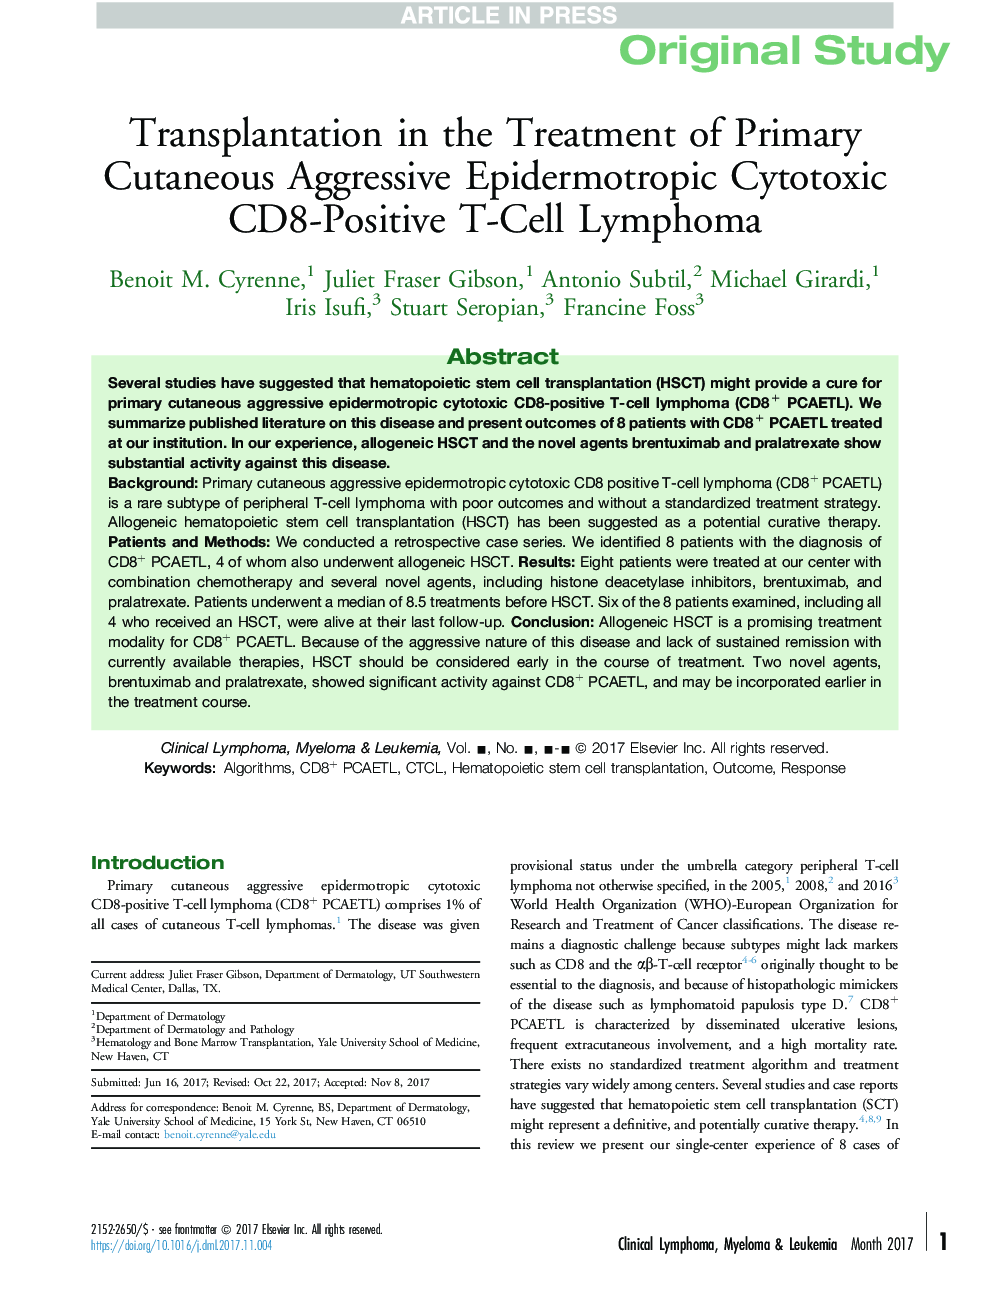 Transplantation in the Treatment of Primary Cutaneous Aggressive Epidermotropic Cytotoxic CD8-Positive T-Cell Lymphoma